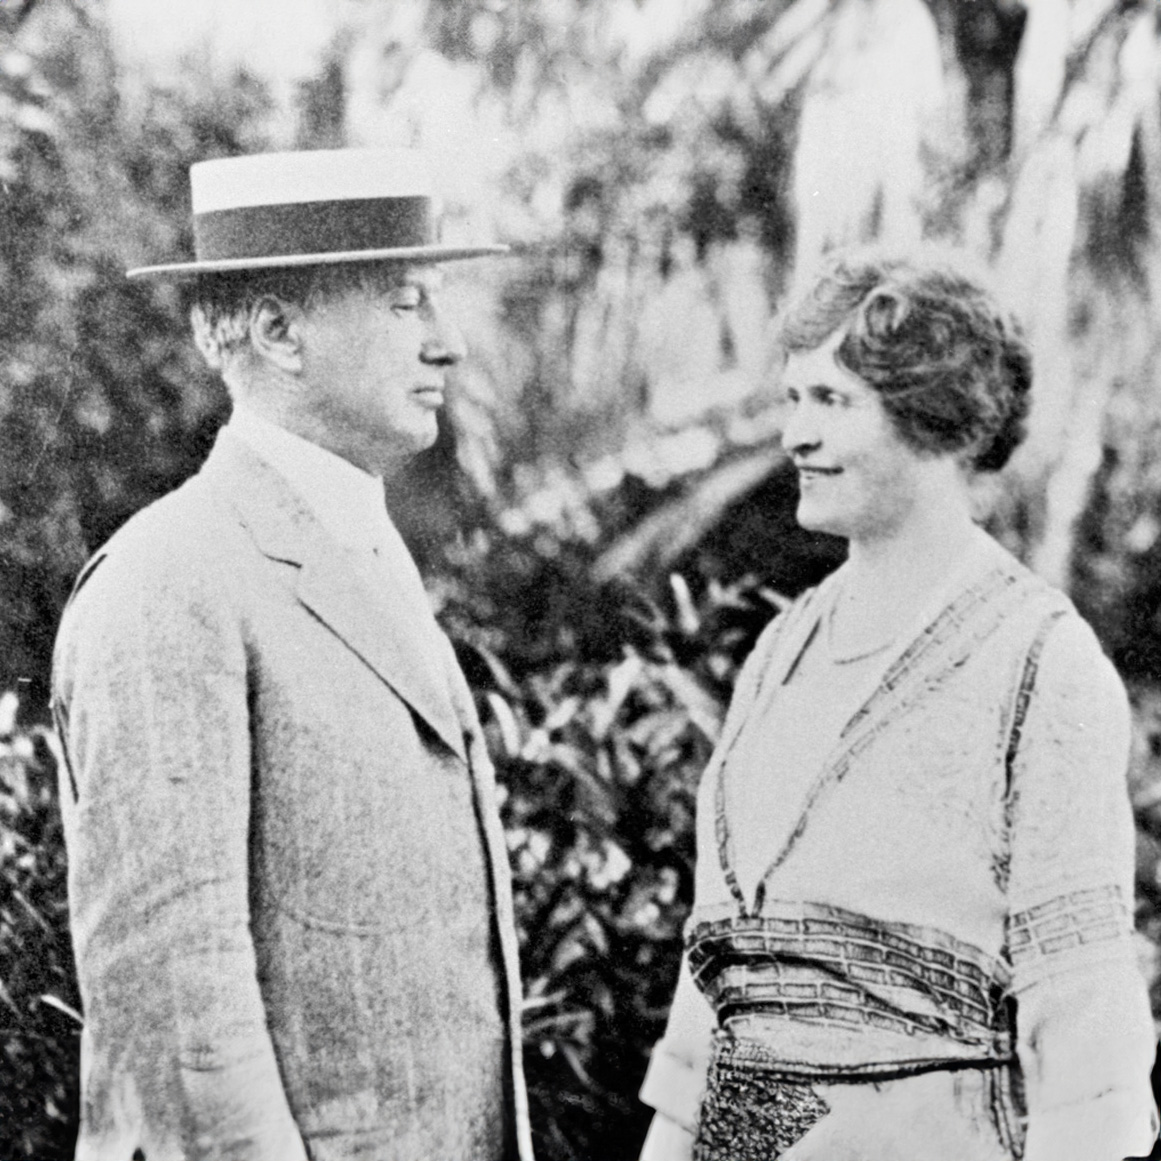 Alfred I. duPont and his wife Jessie